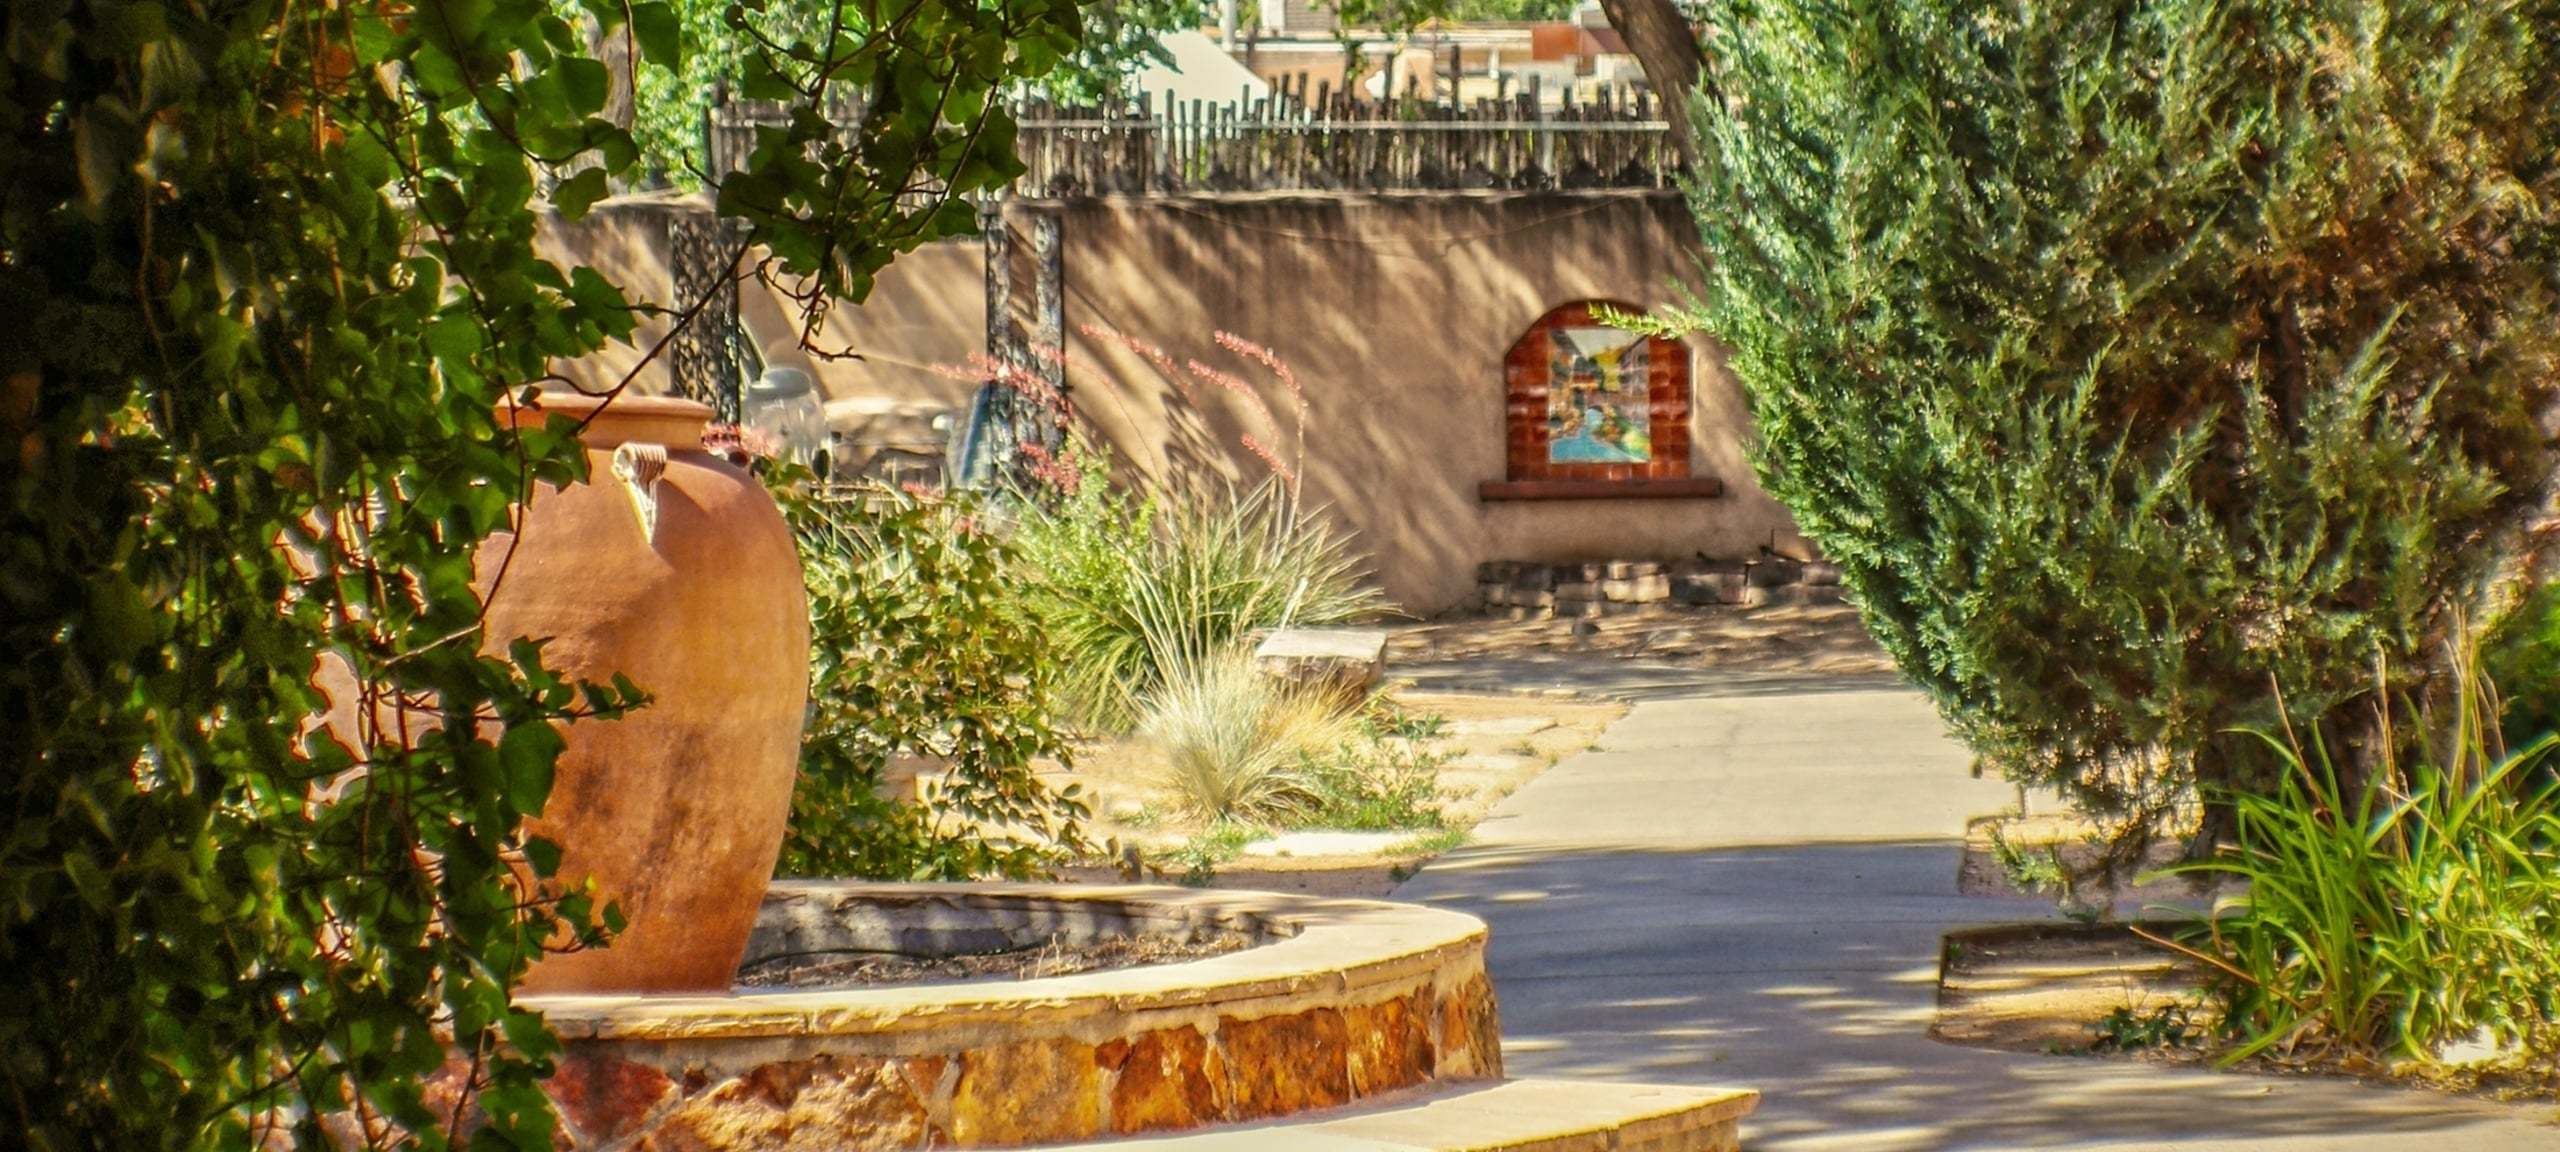 Adobe style home courtyard with fountain in Santa Fe, NM